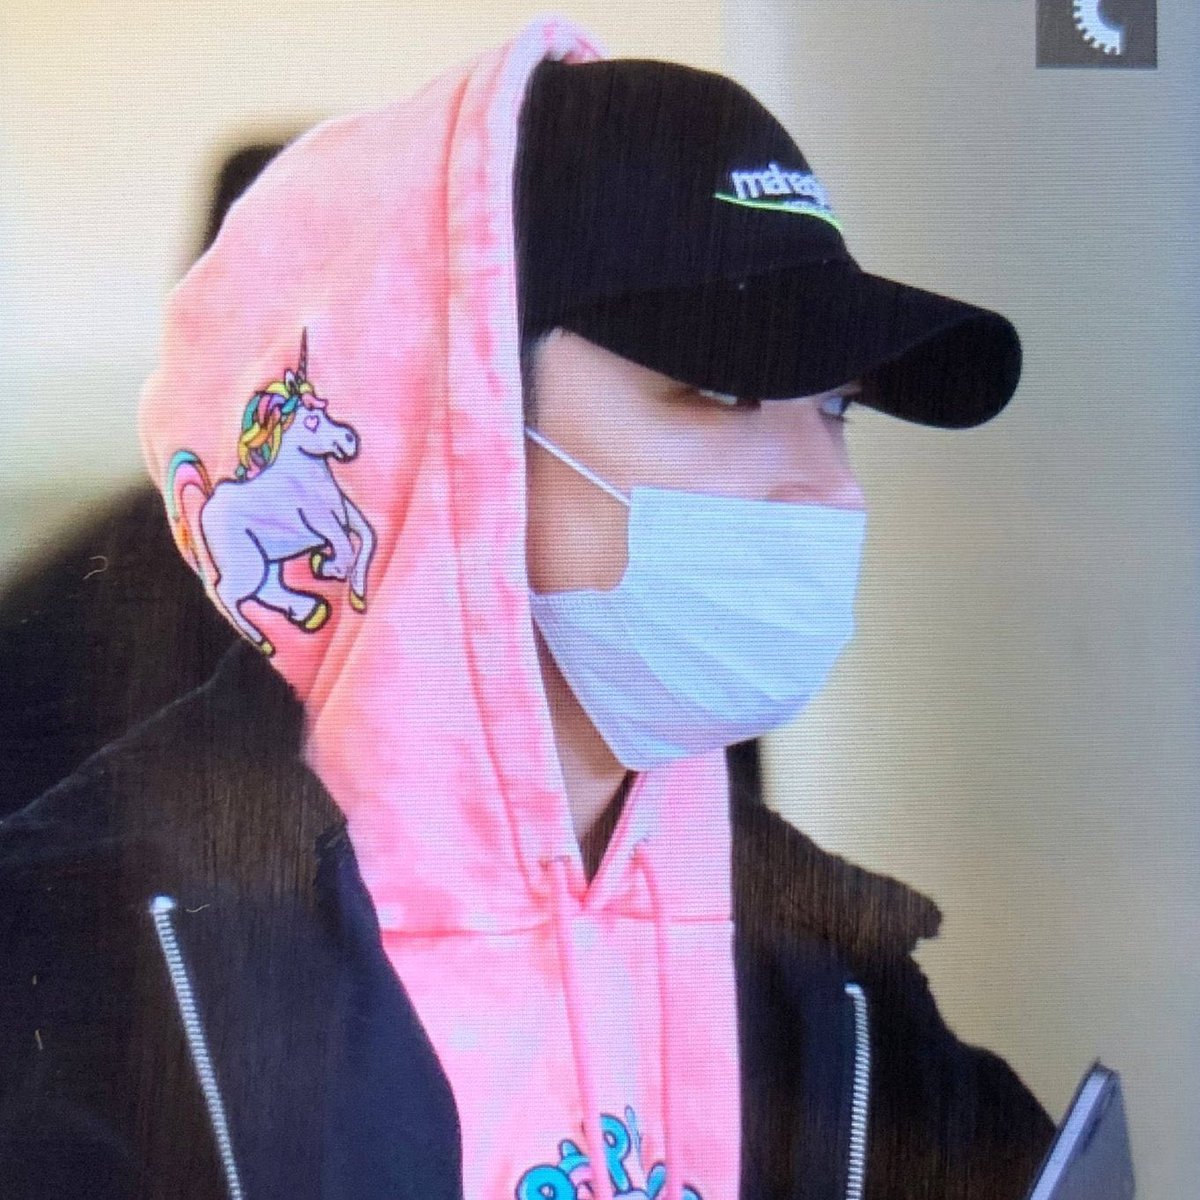 Ten’s RIPNDIP hoodie he wore got sold out on their website (sorry for the cropped pic couldn’t find the original one)